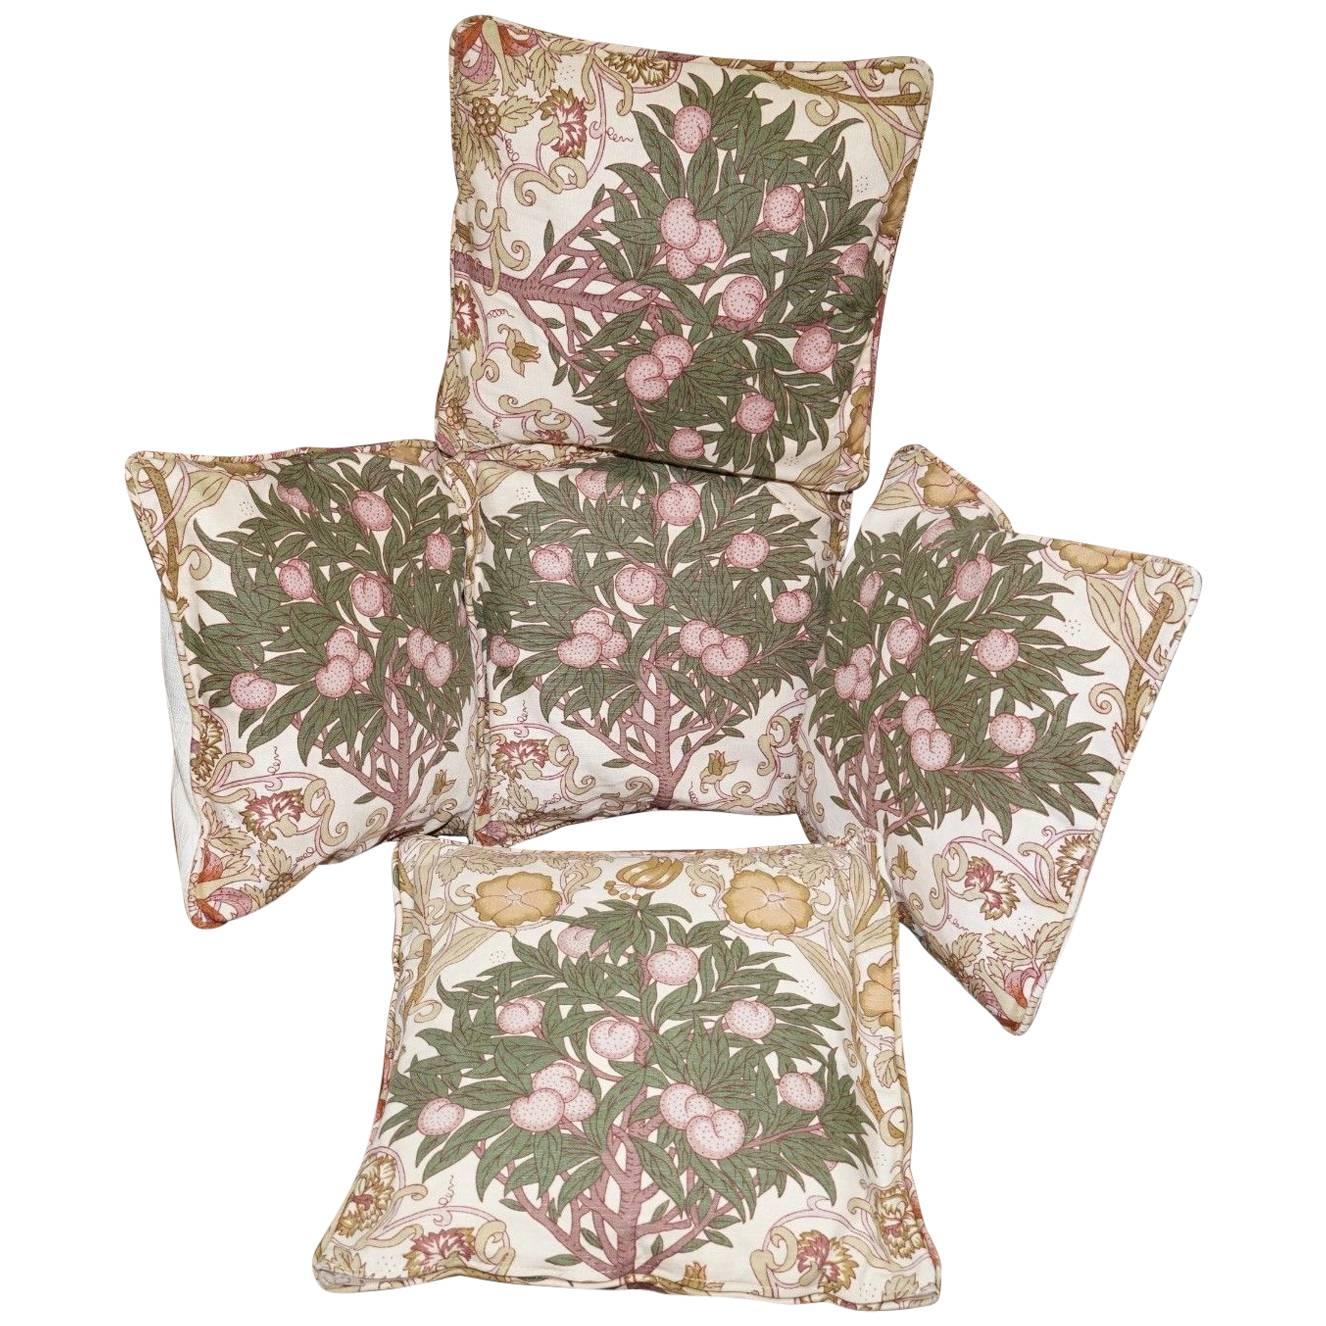 Matching Set of Liberty's London Scatter Cushions Part of a Large Suite